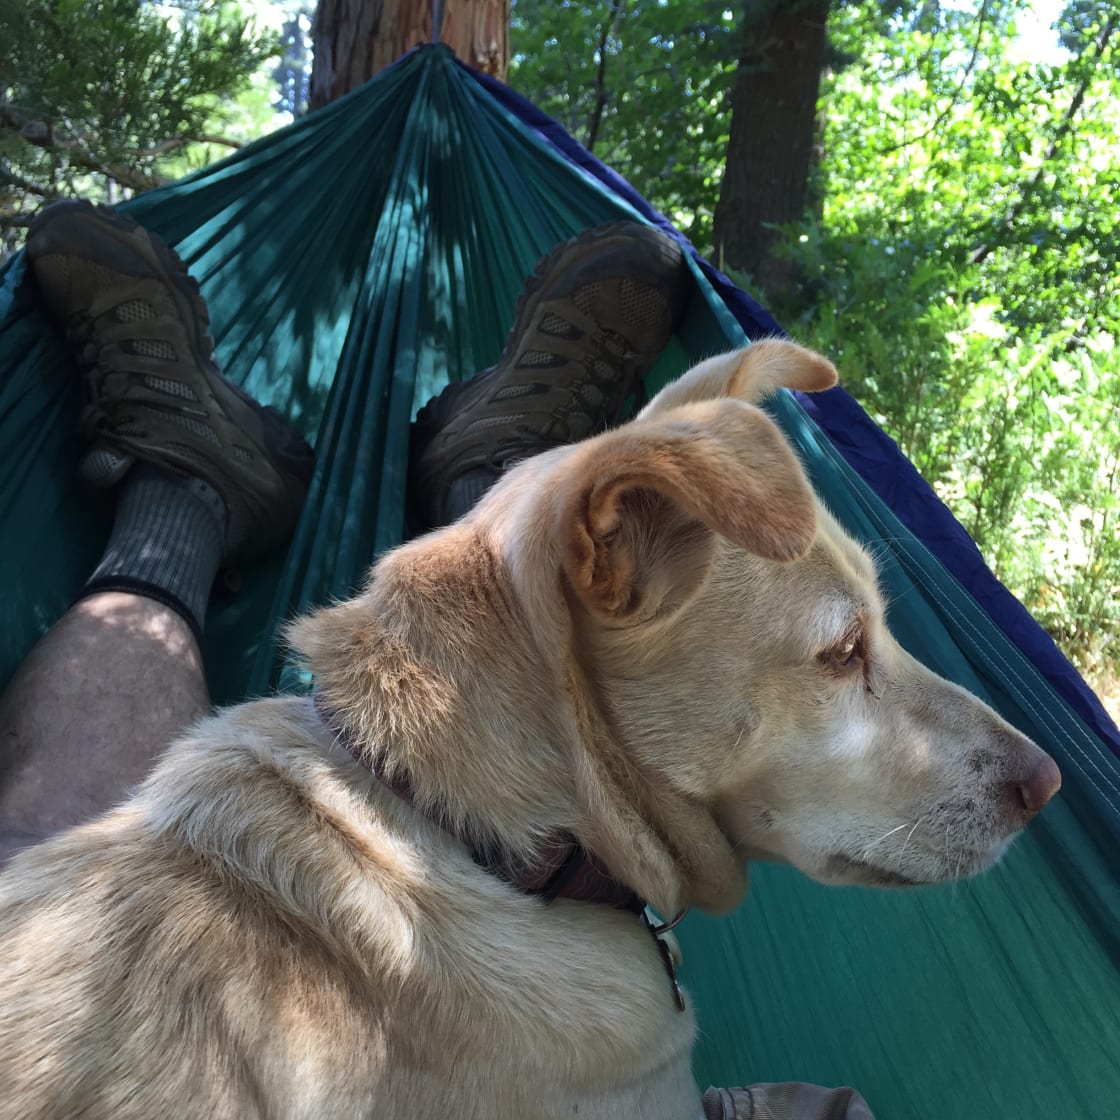 Ethel joined me for some hammock time.